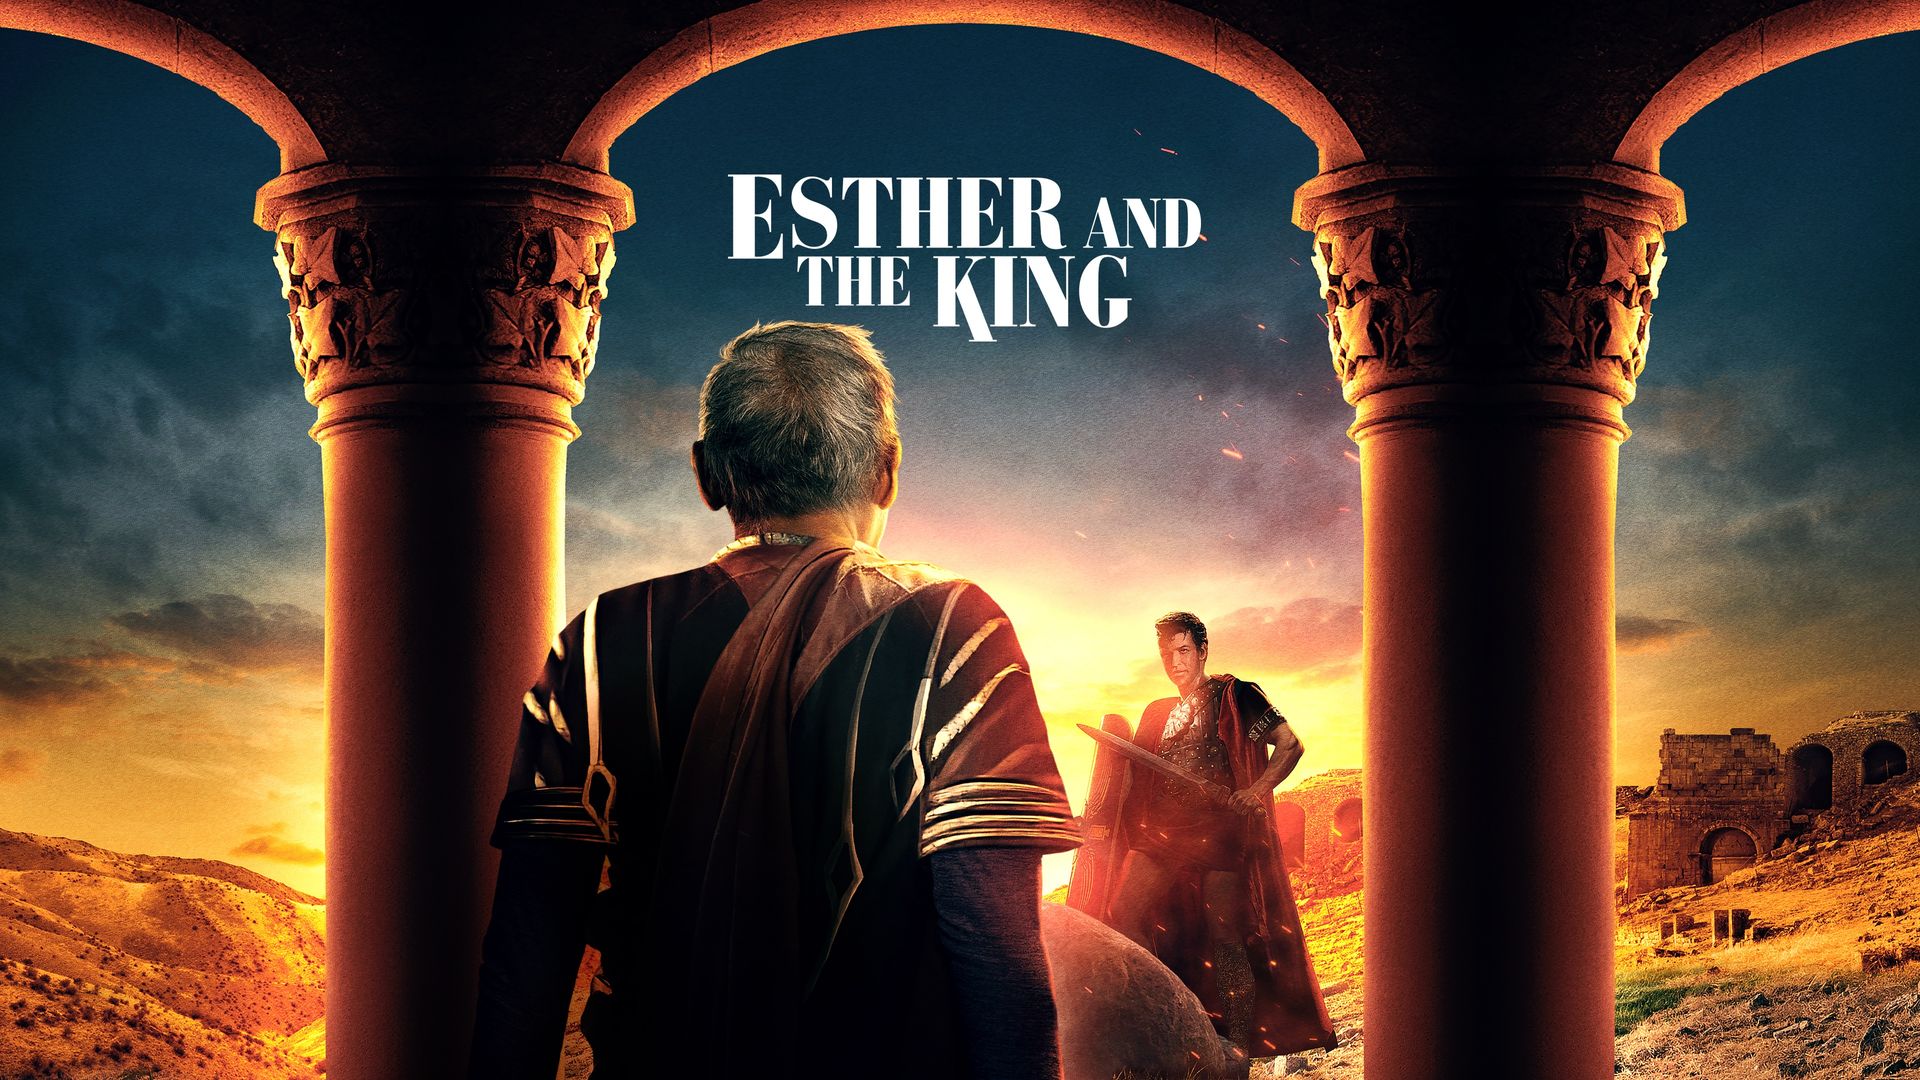 Esther and the King Backdrop